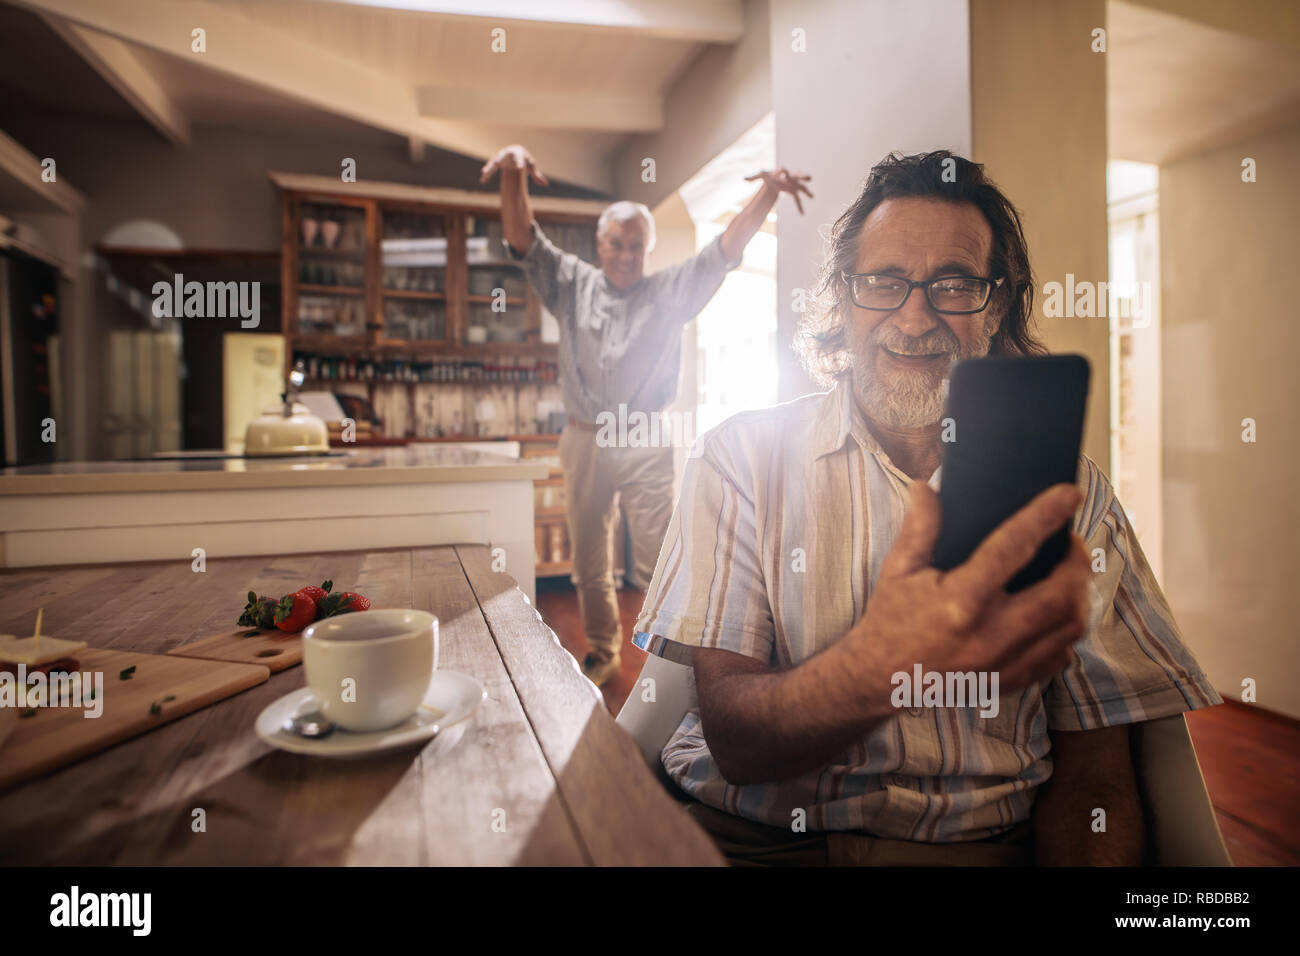 Happy senior man taking selfie with friend standing at back making funny gestures.  Two elderly men taking selfie with mobile phone at home. Stock Photo